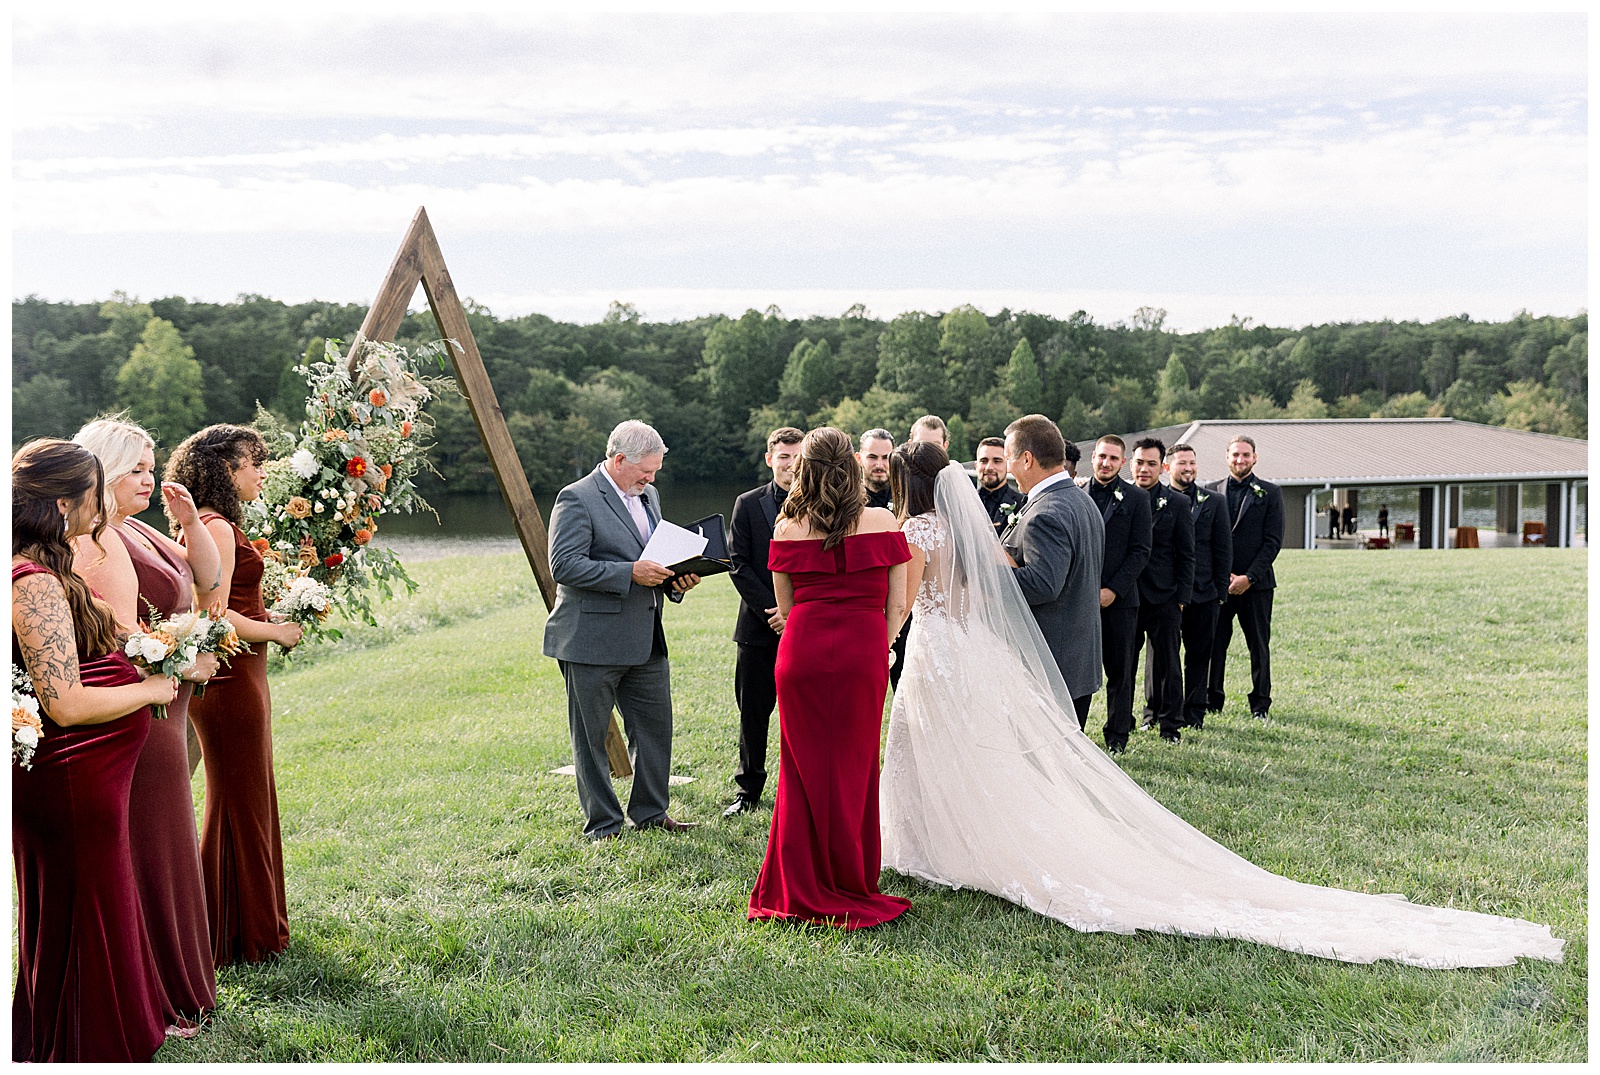 Rust and Terracotta wedding colors Waters Edge Mount Ida Farm Wedding by Michael and Jasmine Photography